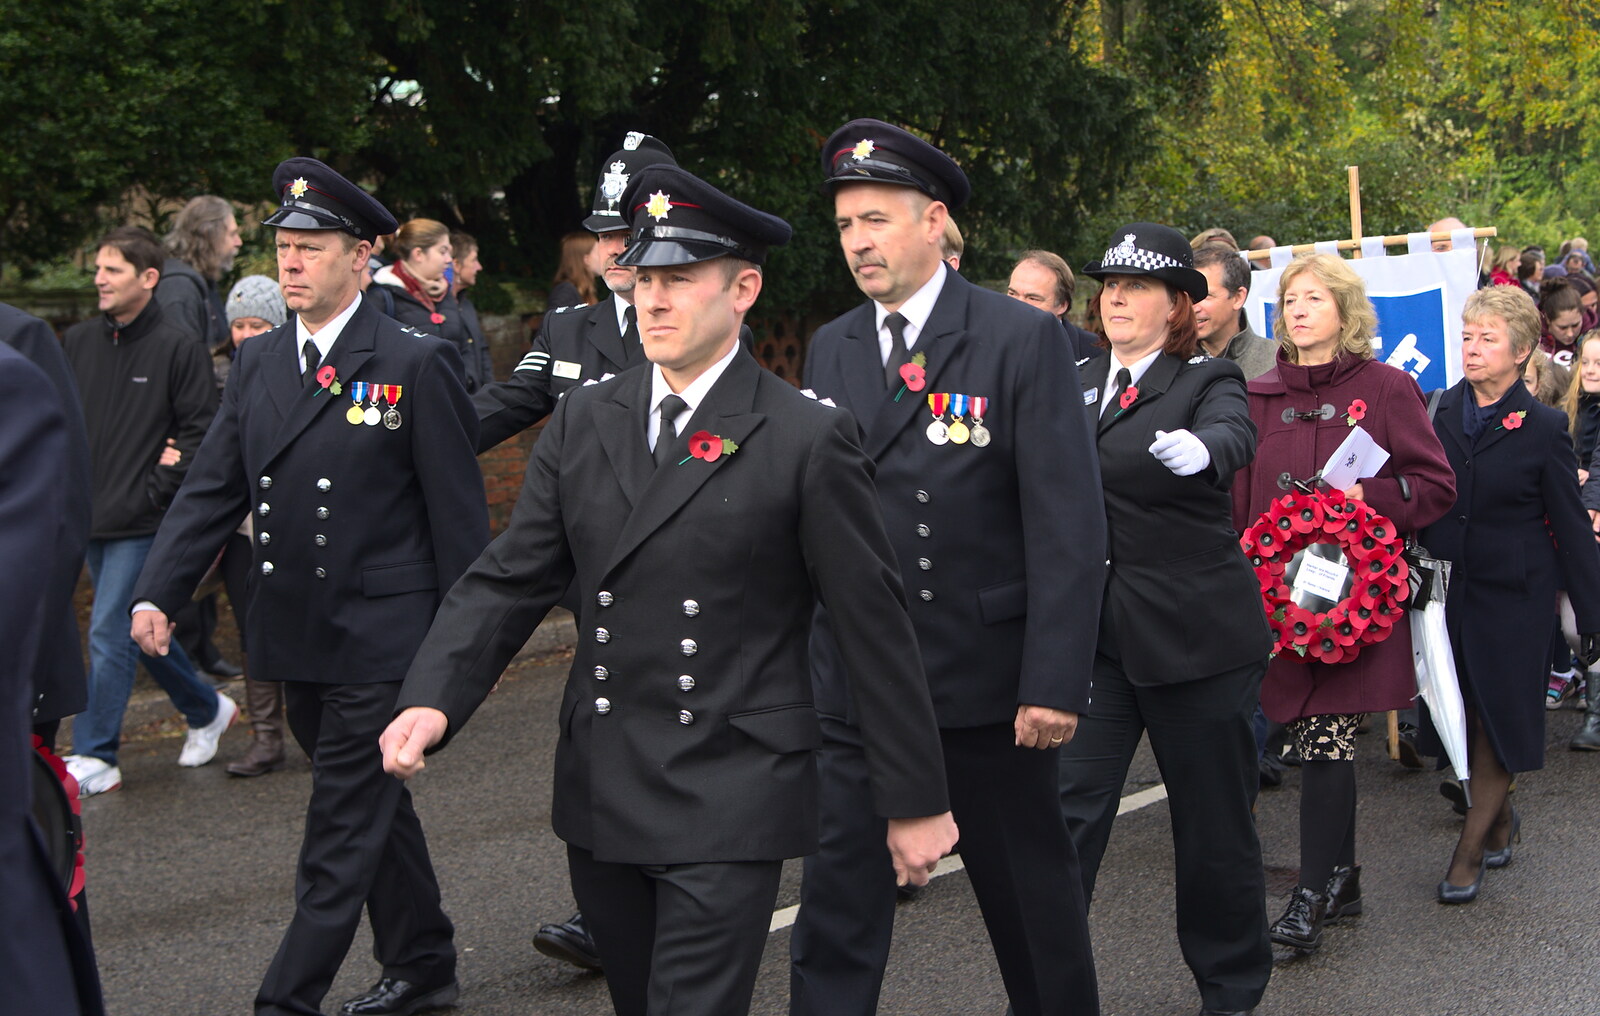 The fire service from A Remembrance Sunday Parade, Eye, Suffolk - 9th November 2014